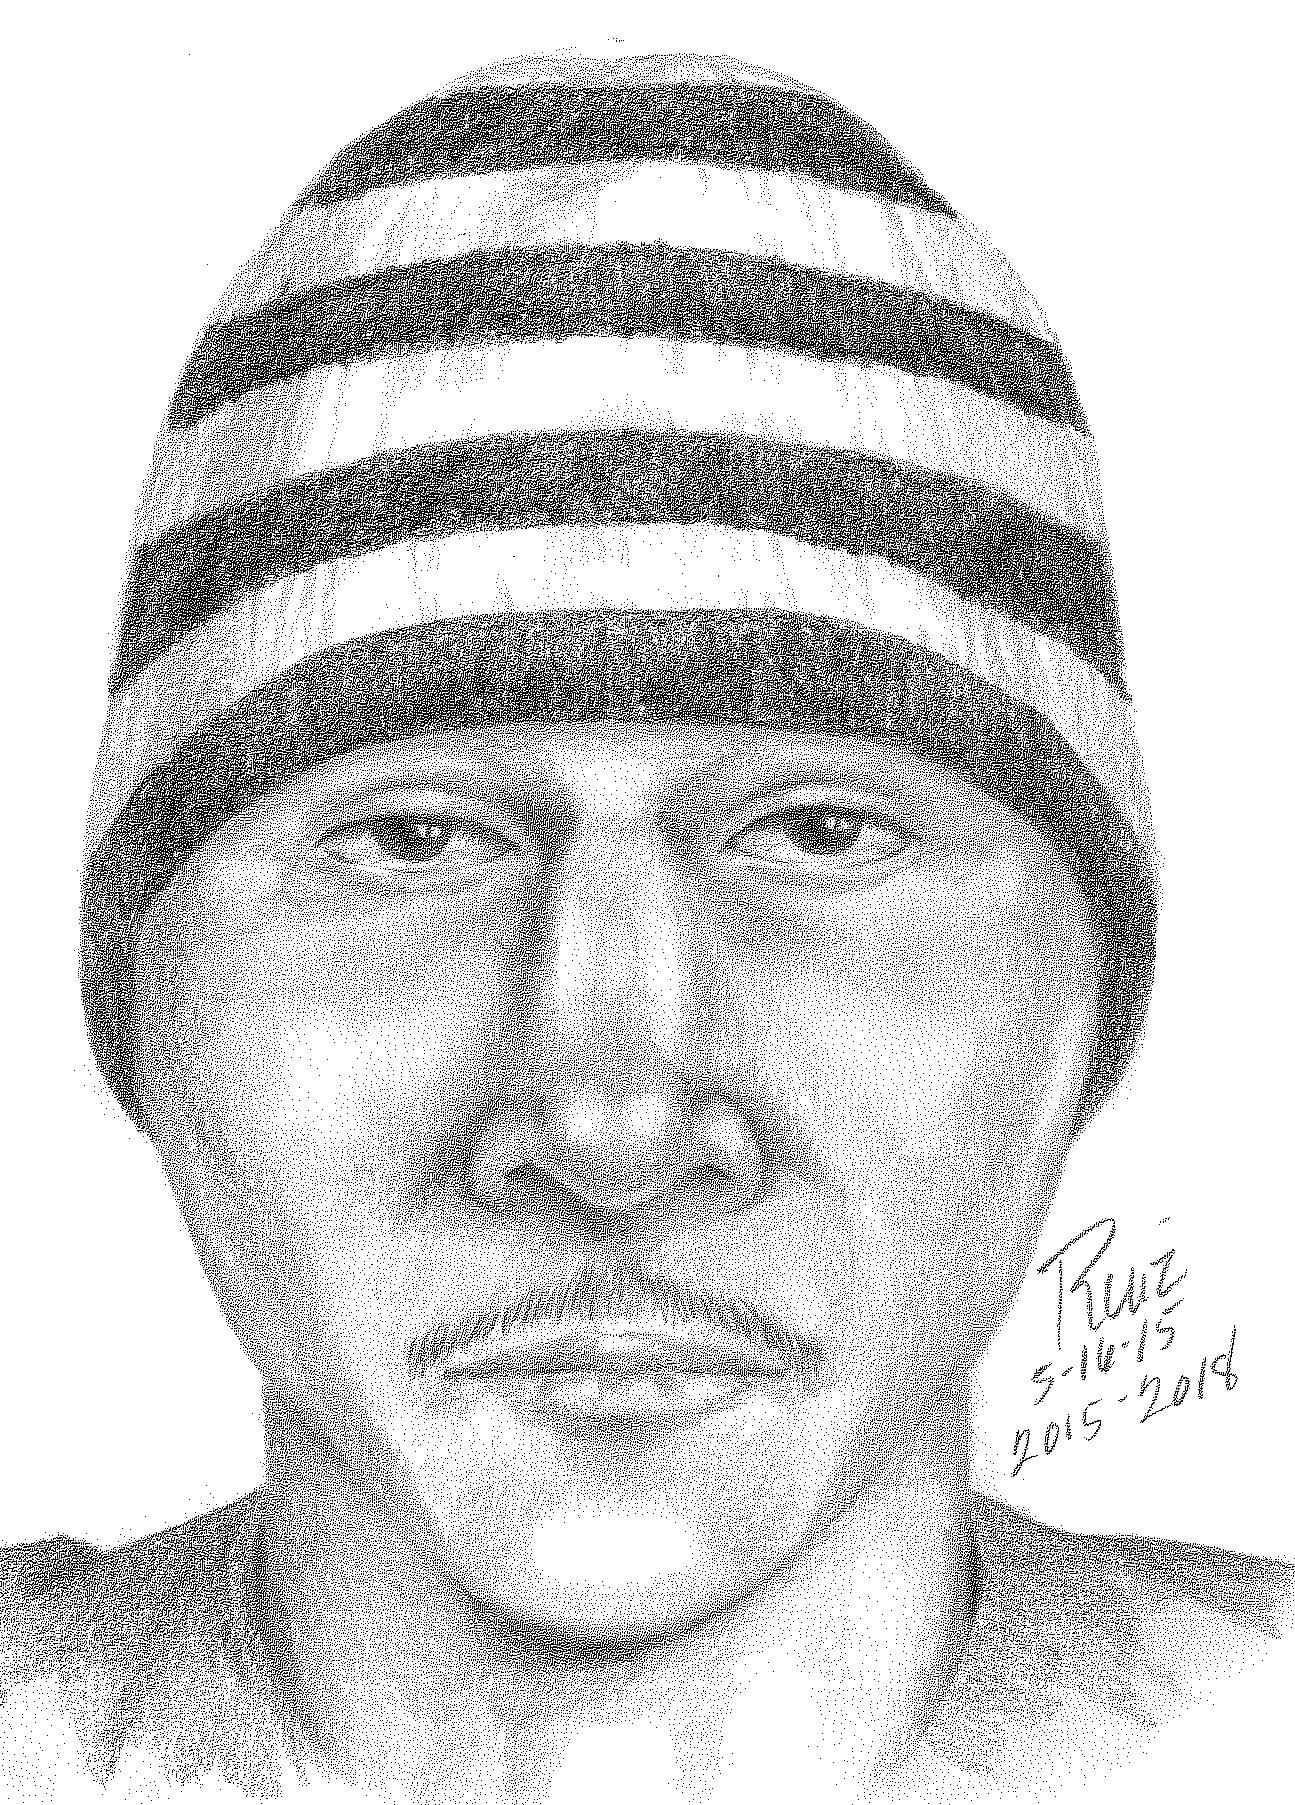 Campbell police are searching for a man who allegedly attempted to kidnap a young girl walking her dog Saturday morning. (via Bay City News)